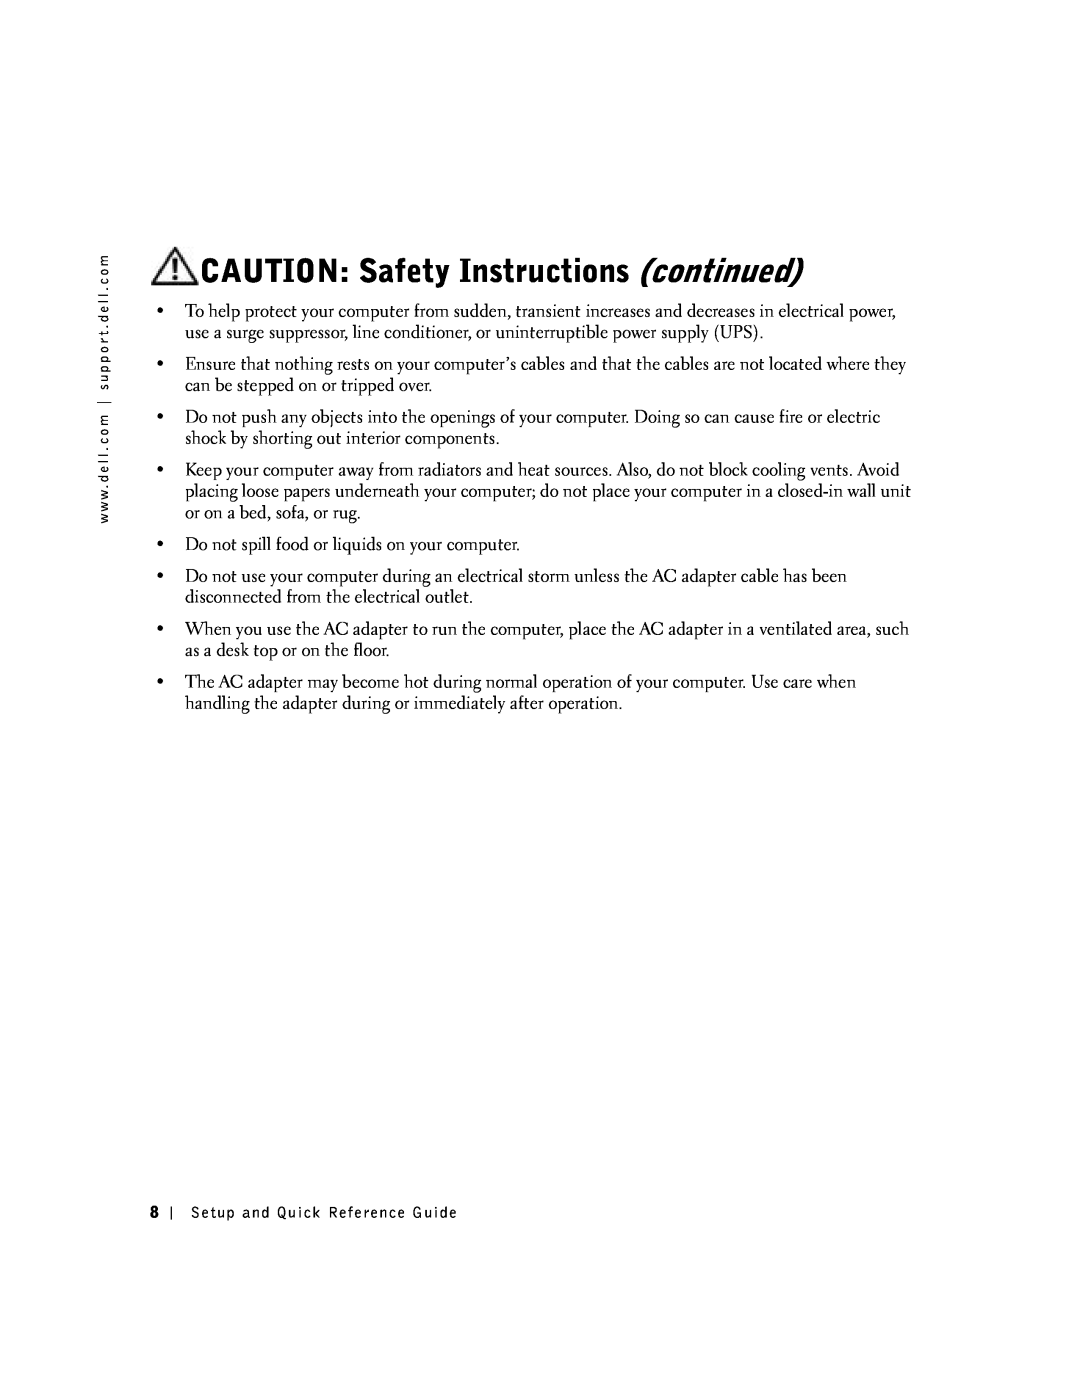 Dell SX manual CAUTION Safety Instructions continued 